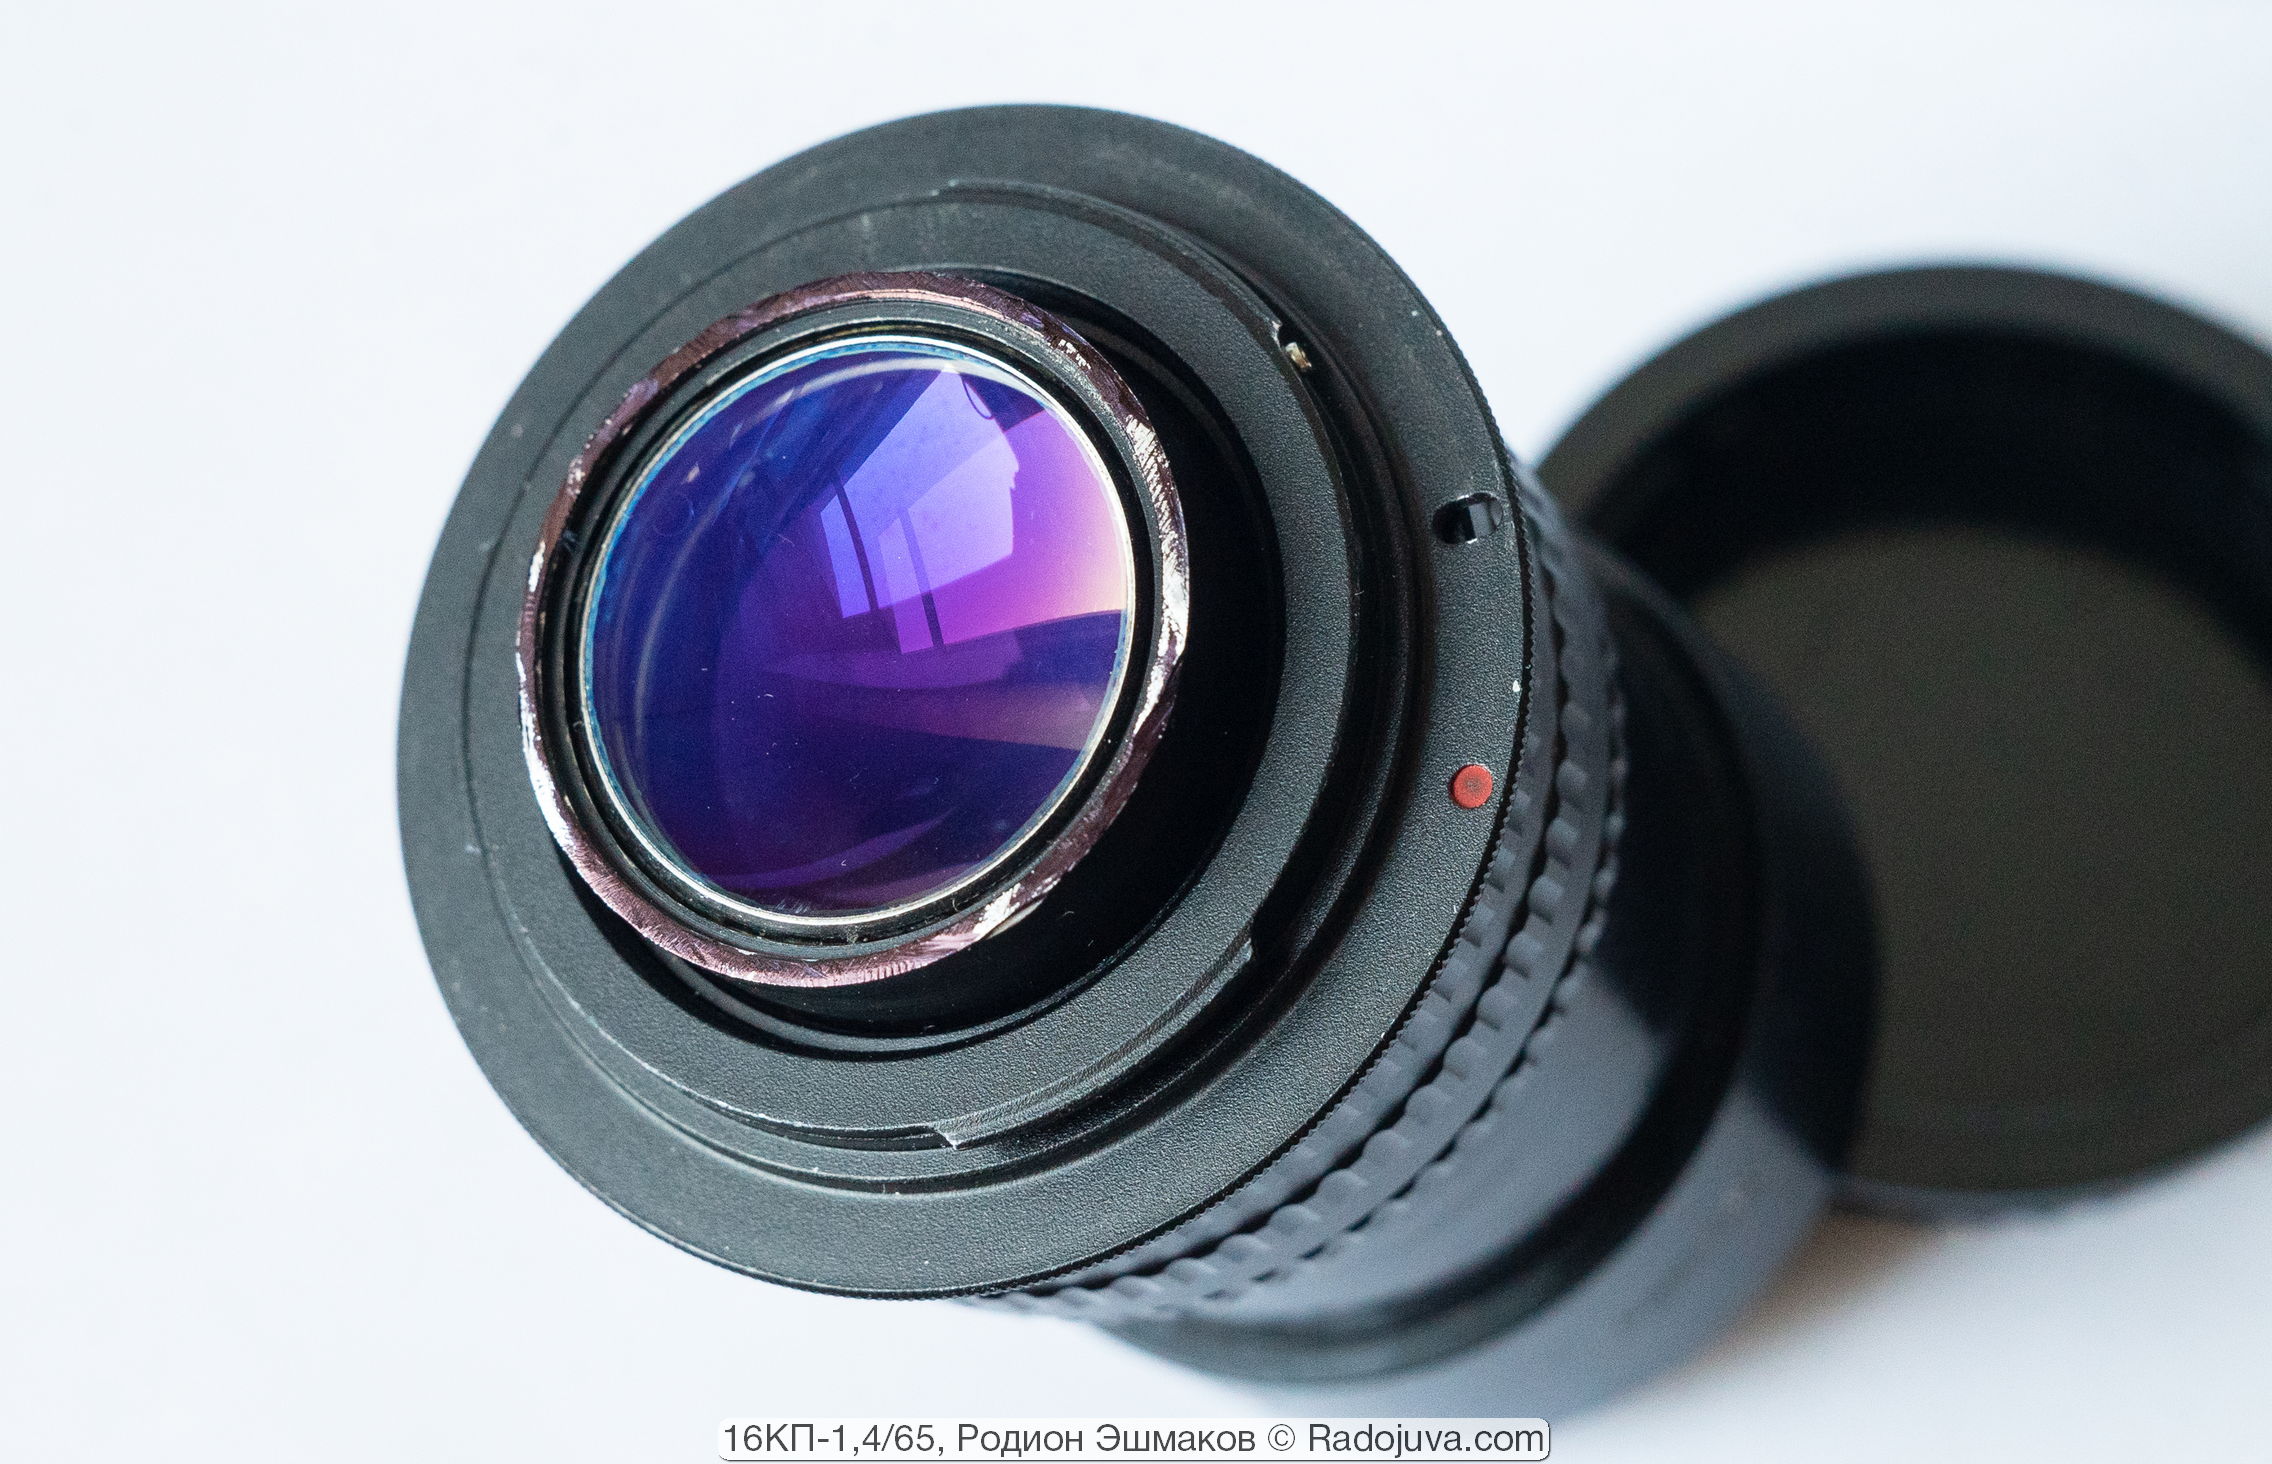 The metal around the rear lens has been cut to reduce the size of the rear.